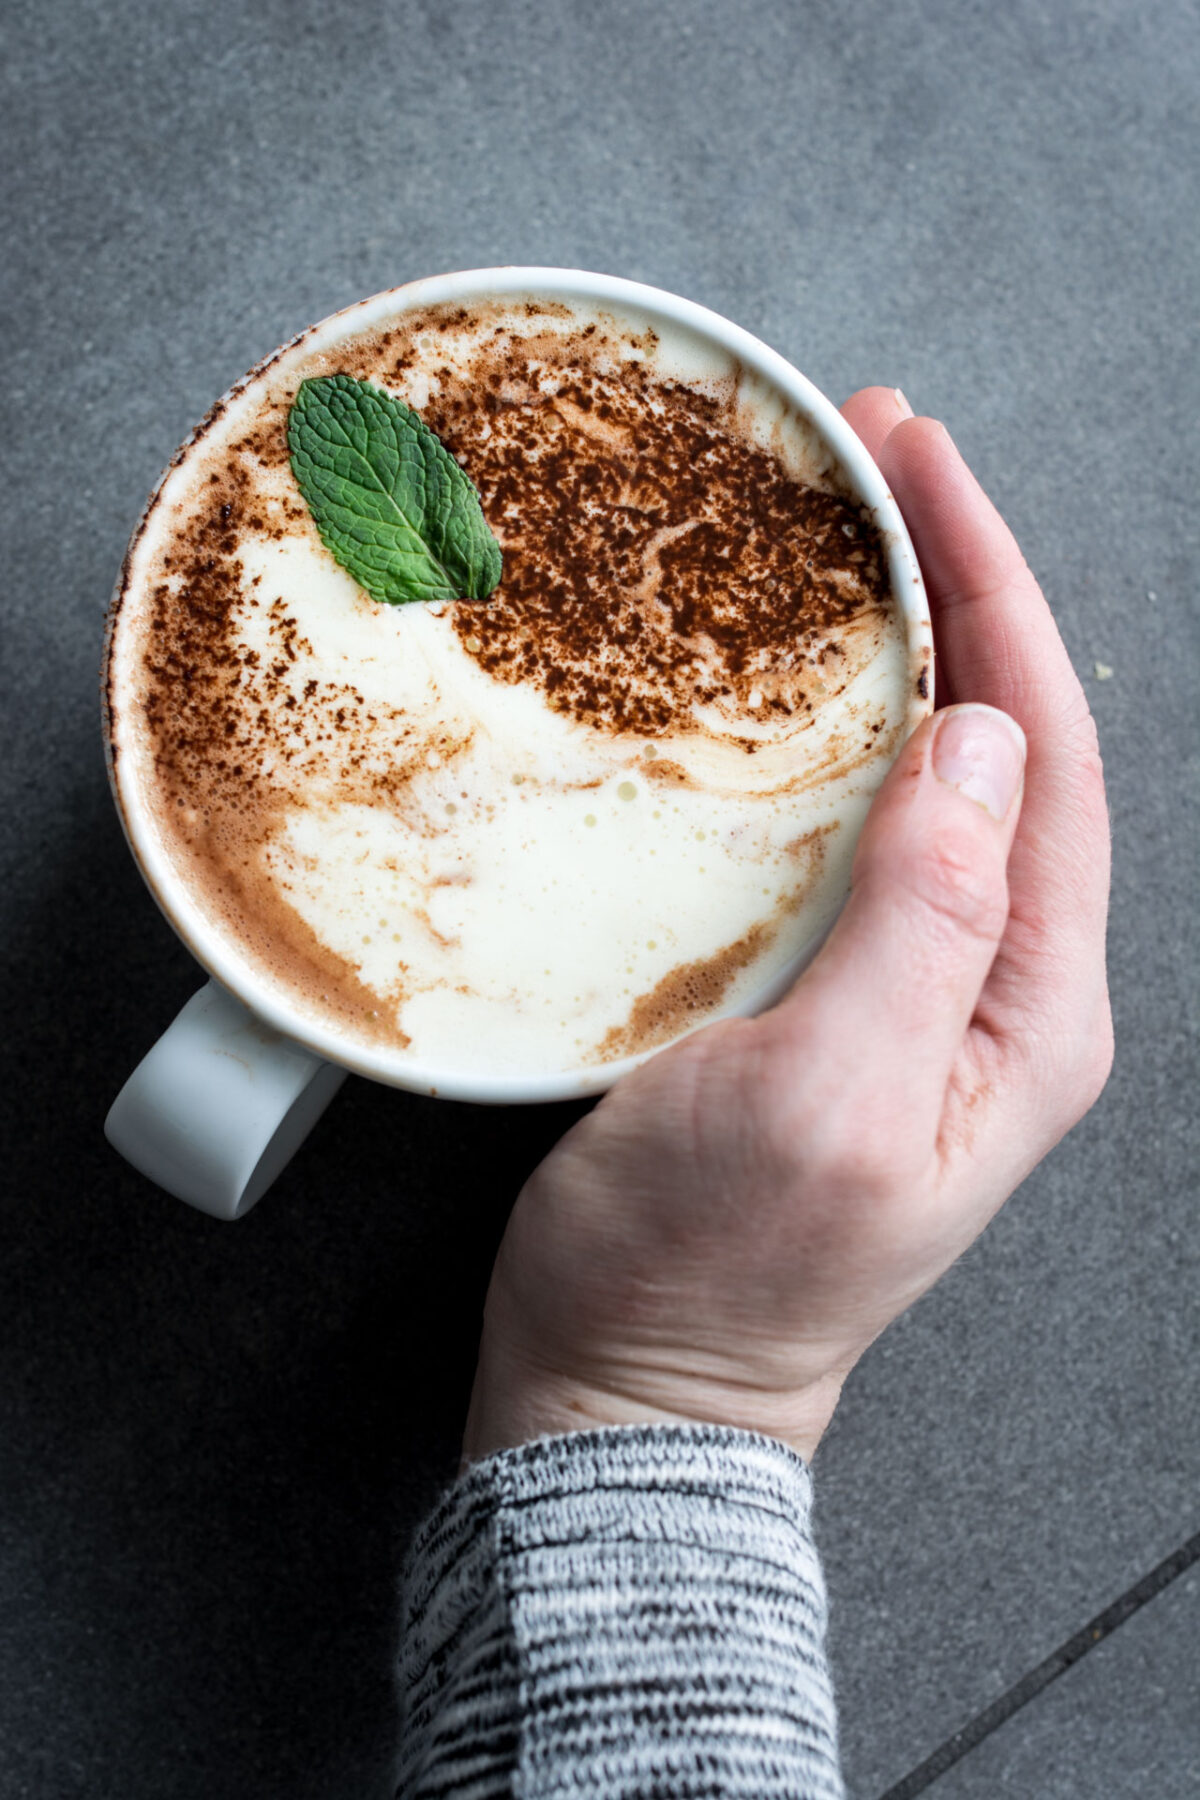 A woman's hand wrapped around a cup of dairy-free peppermint hot chocolate with cocoa sprinkled on top and garnished with a mint leaf.